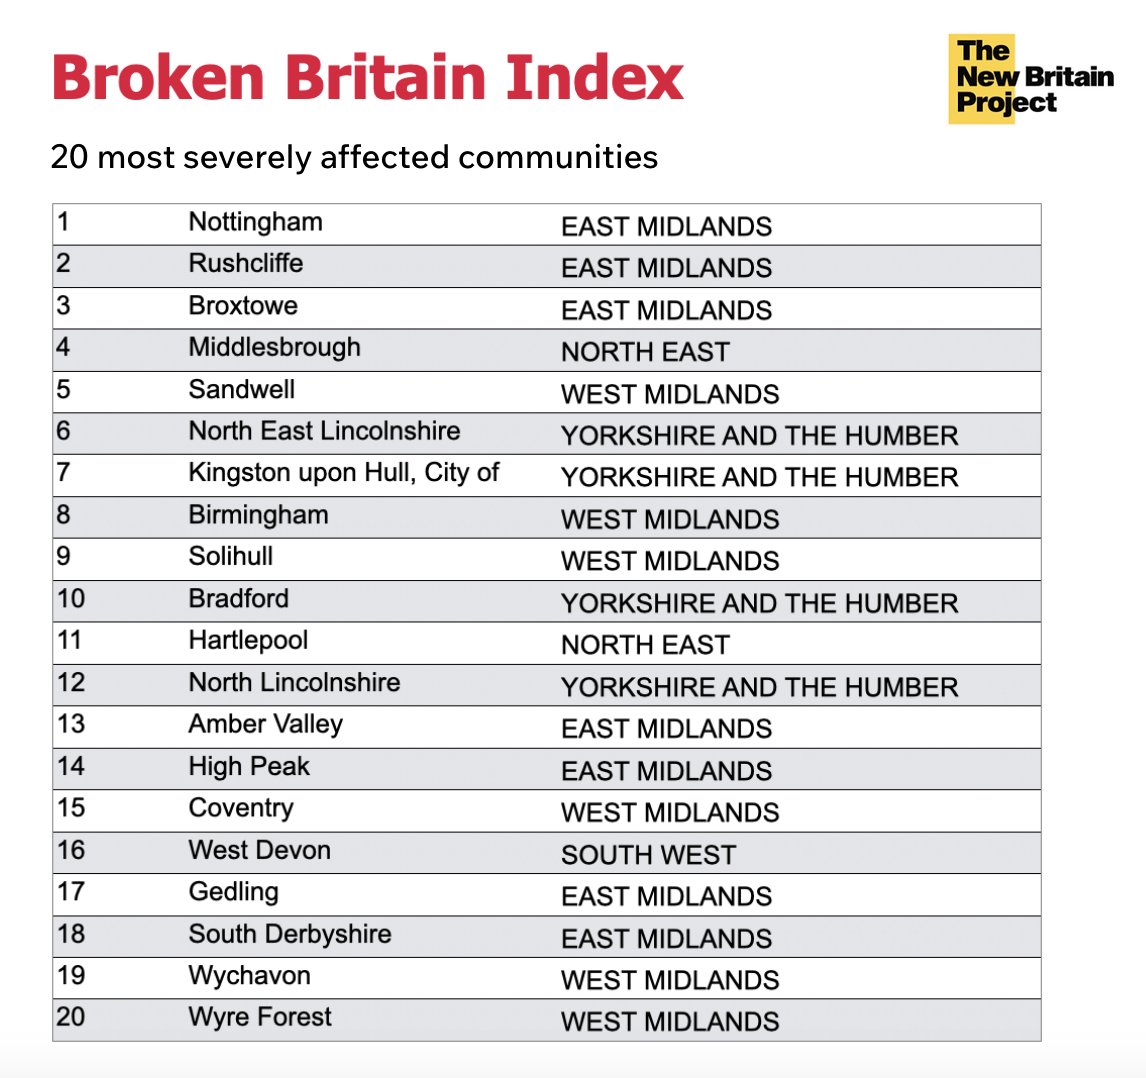 The Index combines 18 key indicators across health, education, policing, transport, and local infrastructure. The verdict? Traditional 'red wall', Midlands, and Northern areas hit hardest. Nottingham stands out as the capital of Broken Britain.